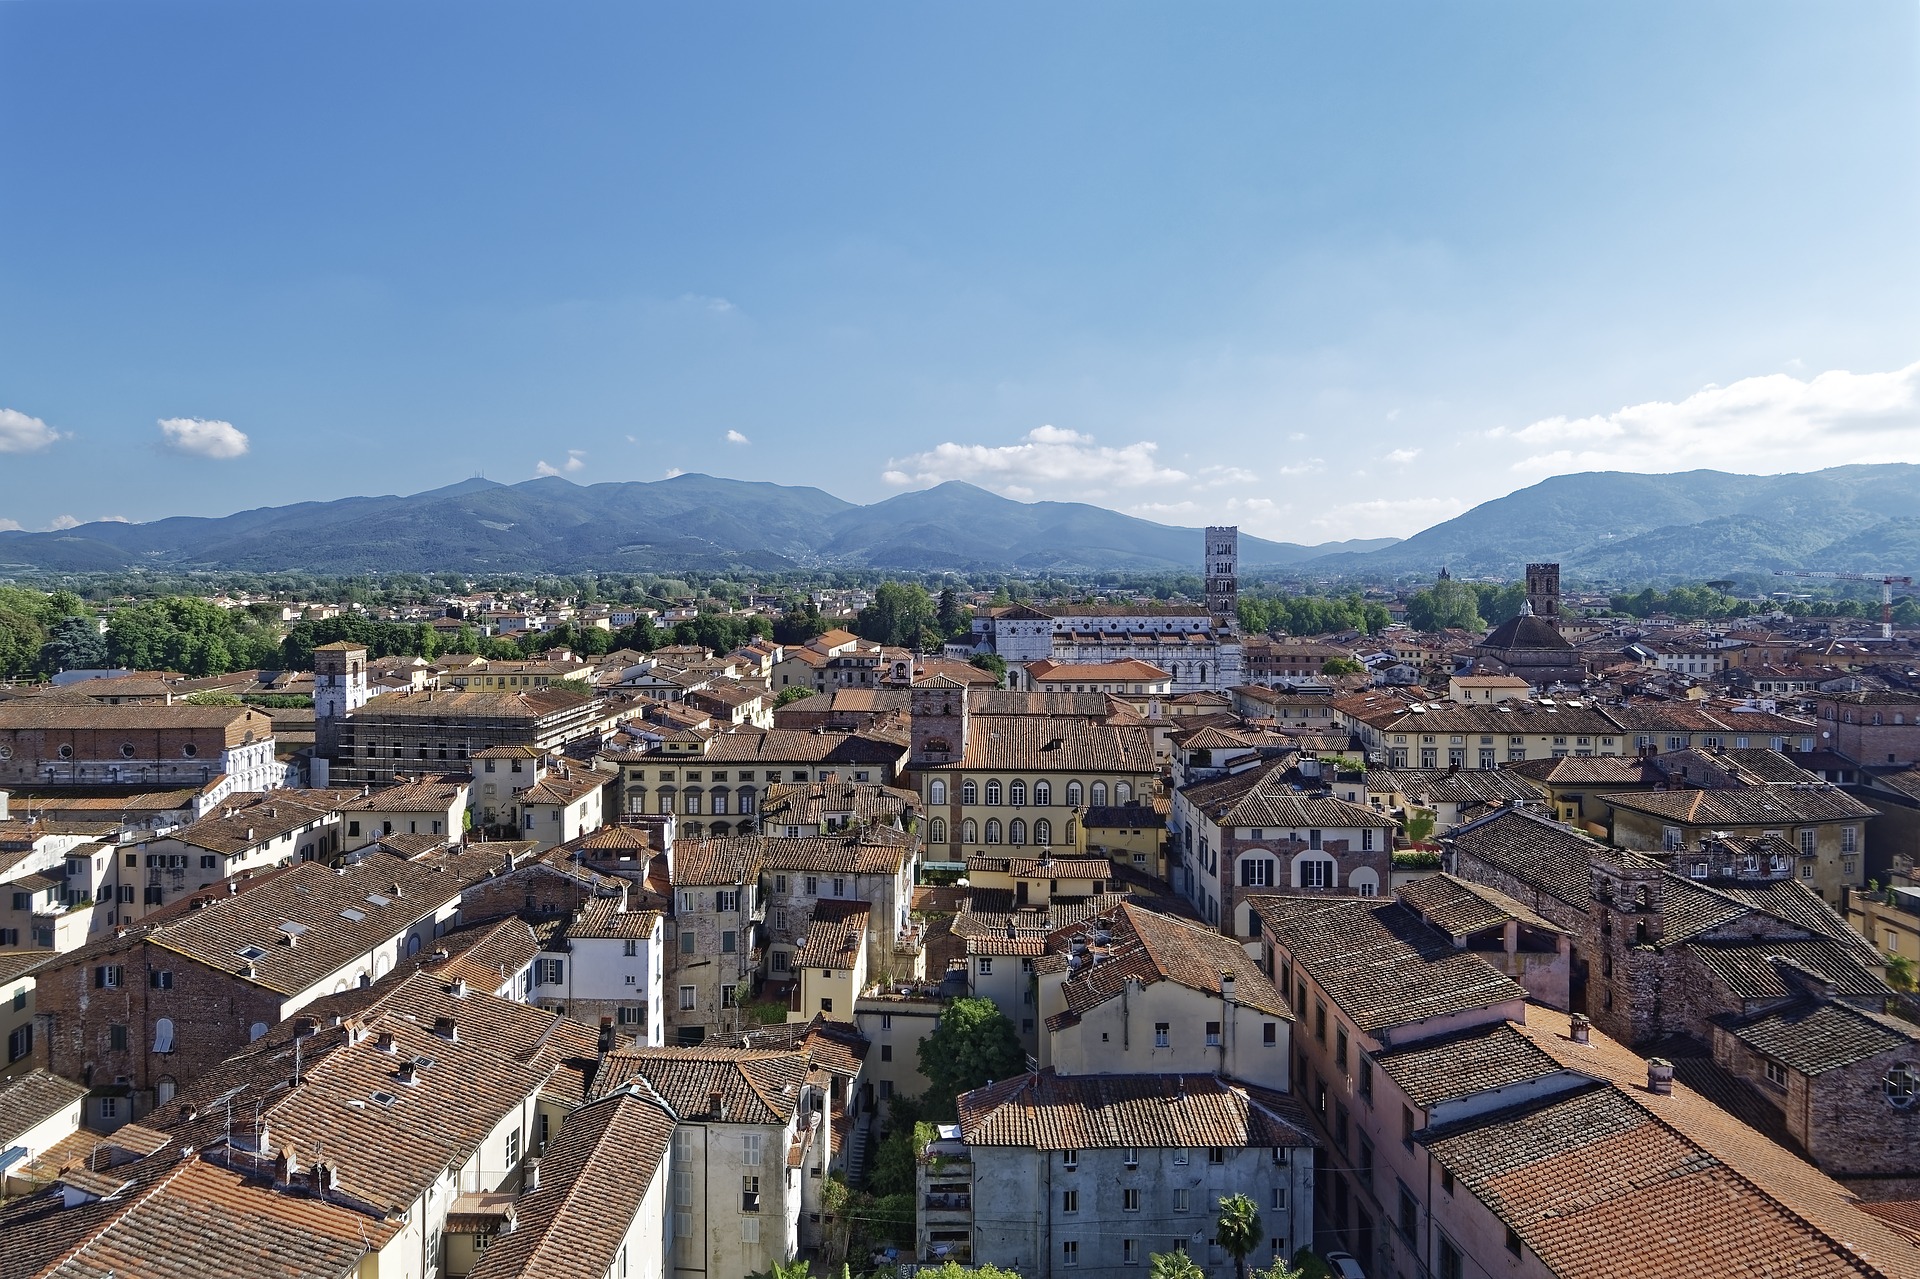 panoramic view of building rooftops and mountains in lucca, tuscany, italy